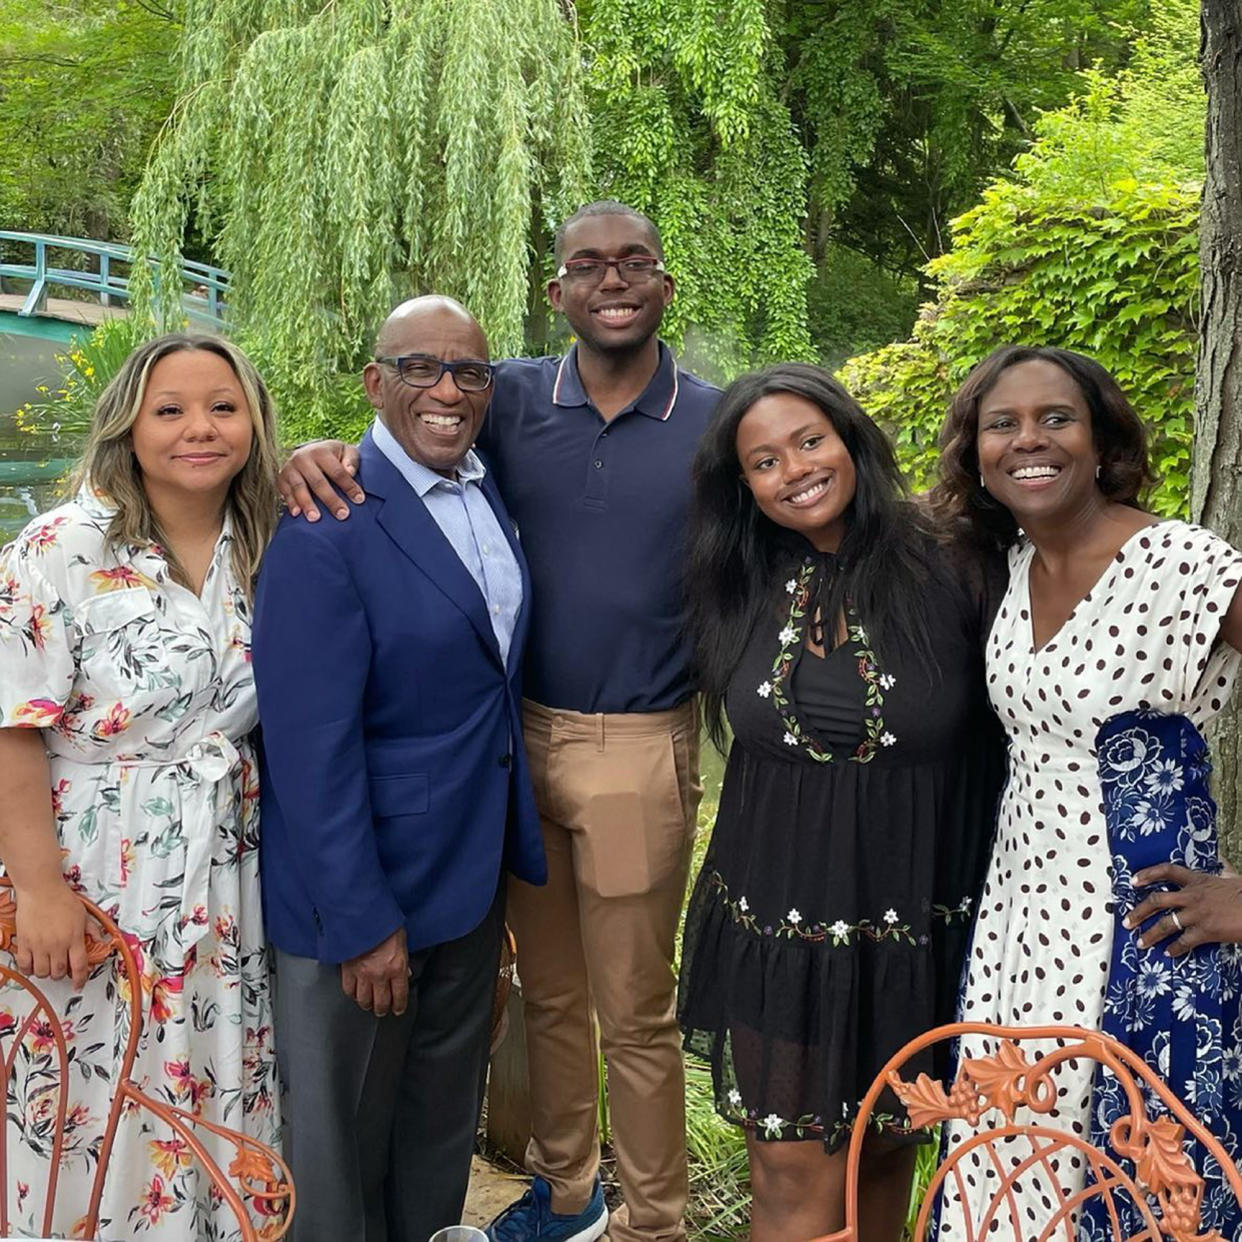 Al is joined by all three of his children — Courtney, Nick and Leila — as well as wife Deborah Roberts, in this sweet family pic. (debrobertsabc / Instagram)